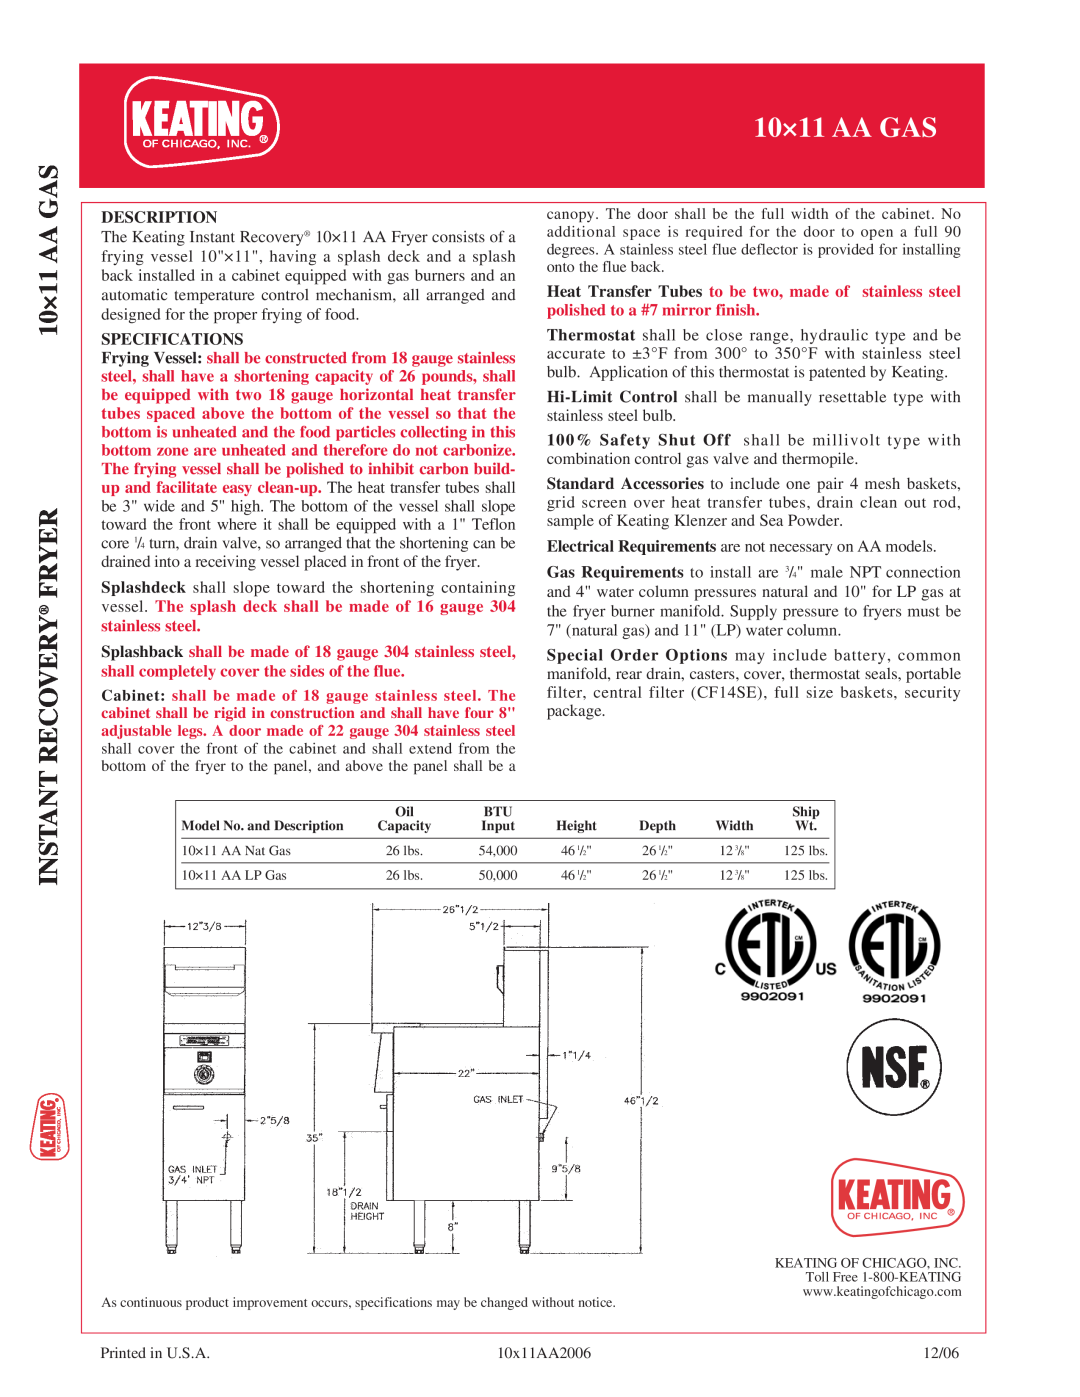 Keating Of Chicago 10x11AA Gas manual 10×11 AA GAS RECOVERY FRYER, Description, Specifications, Instant 